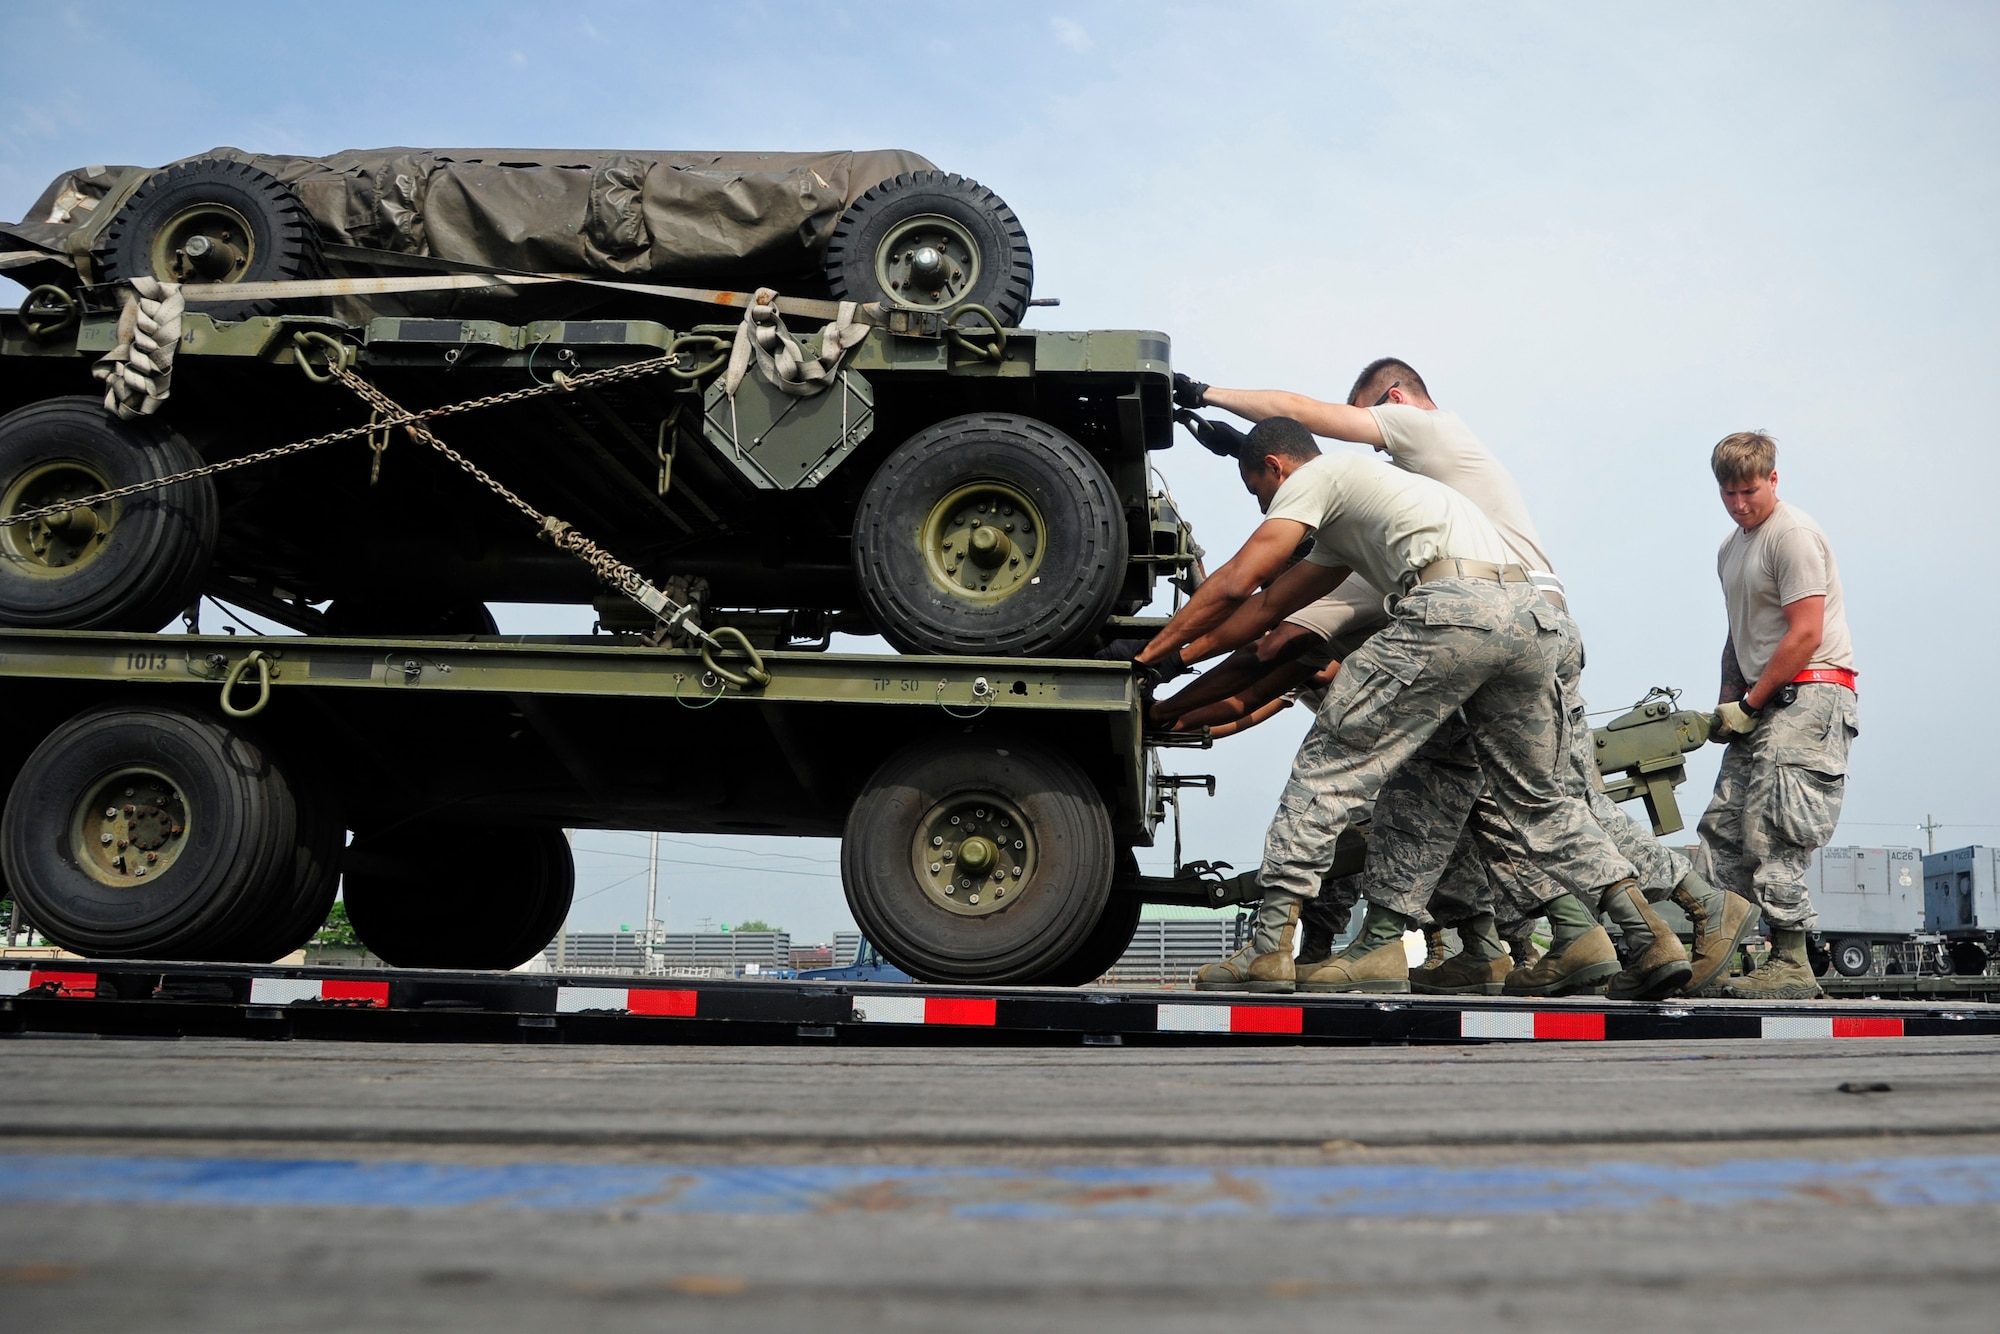 Airmen from the 8th Logistics Readiness Squadron load cargo onto a long-bed truck at Kunsan Air Base, Republic of Korea, Sept. 9, 2014. The equipment is being sent to Osan AB to support 8th Fighter Wing flying operations while the runway at Kunsan undergoes construction. (U.S. Air Force photo by Senior Airman Taylor Curry/Released)